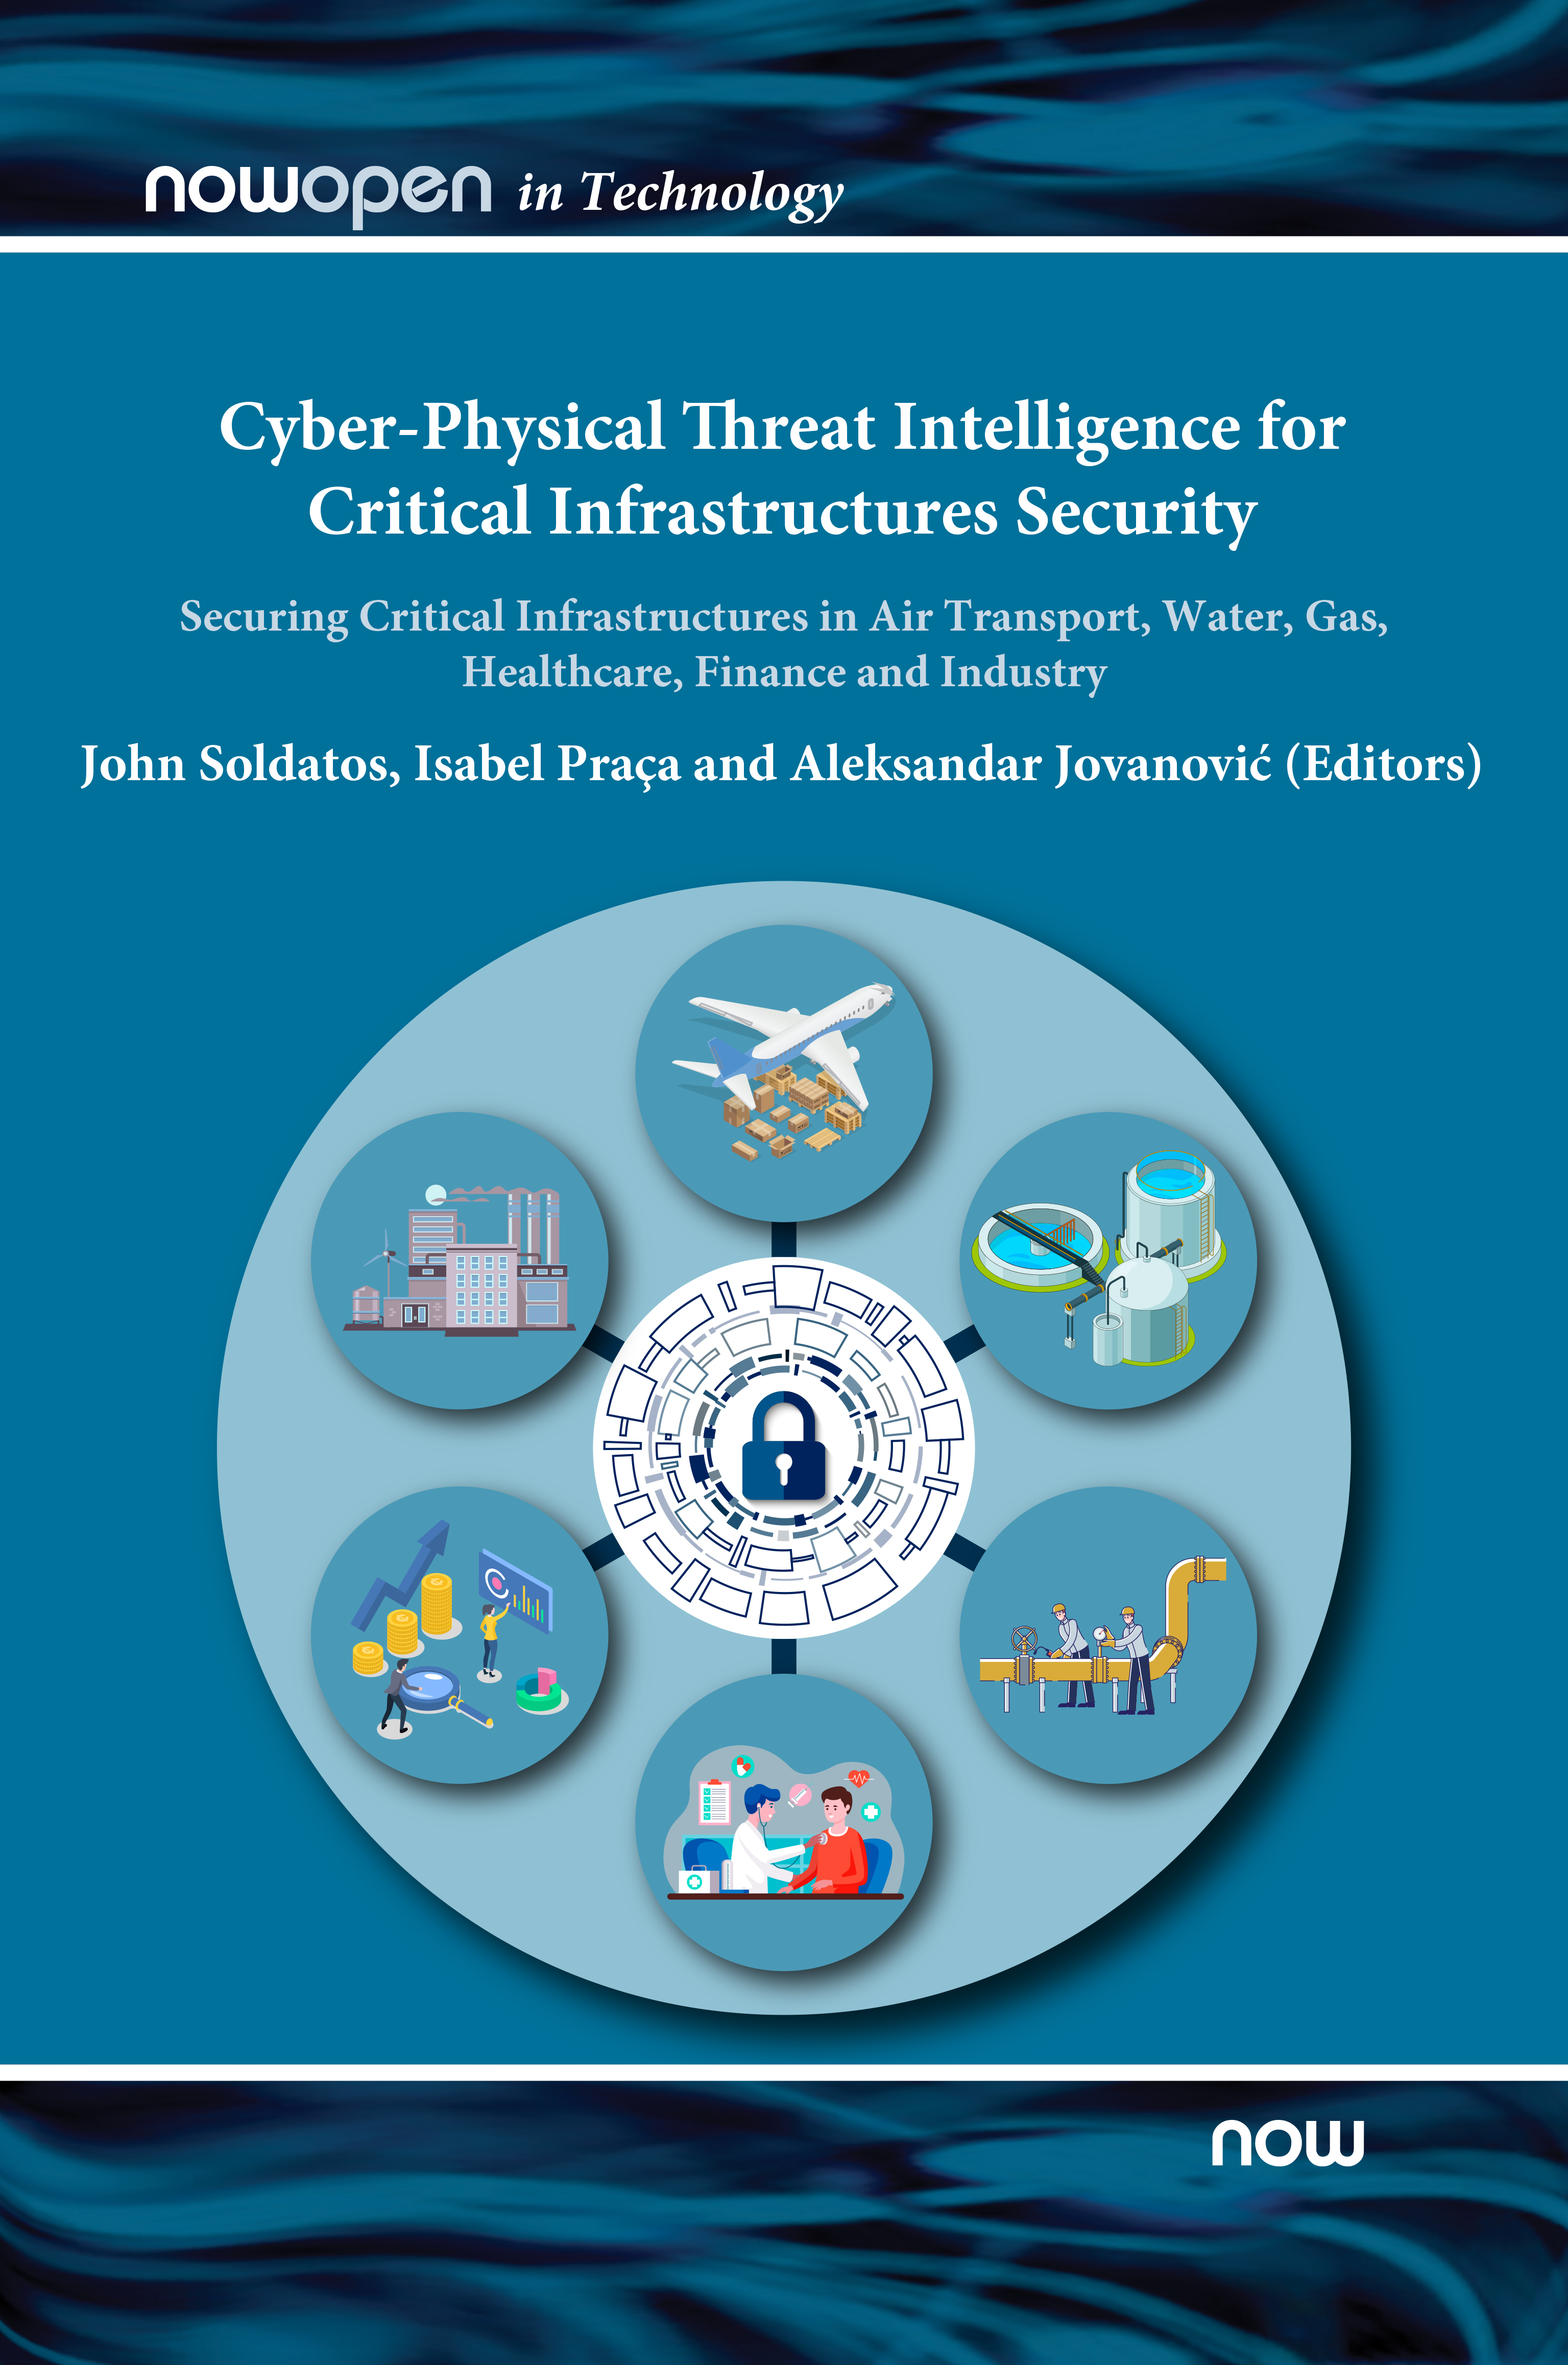 Cyber-Physical Threat Intelligence for Critical Infrastructures Security: Securing Critical Infrastructures in Air Transport, Water, Gas, Healthcare, Finance and Industry